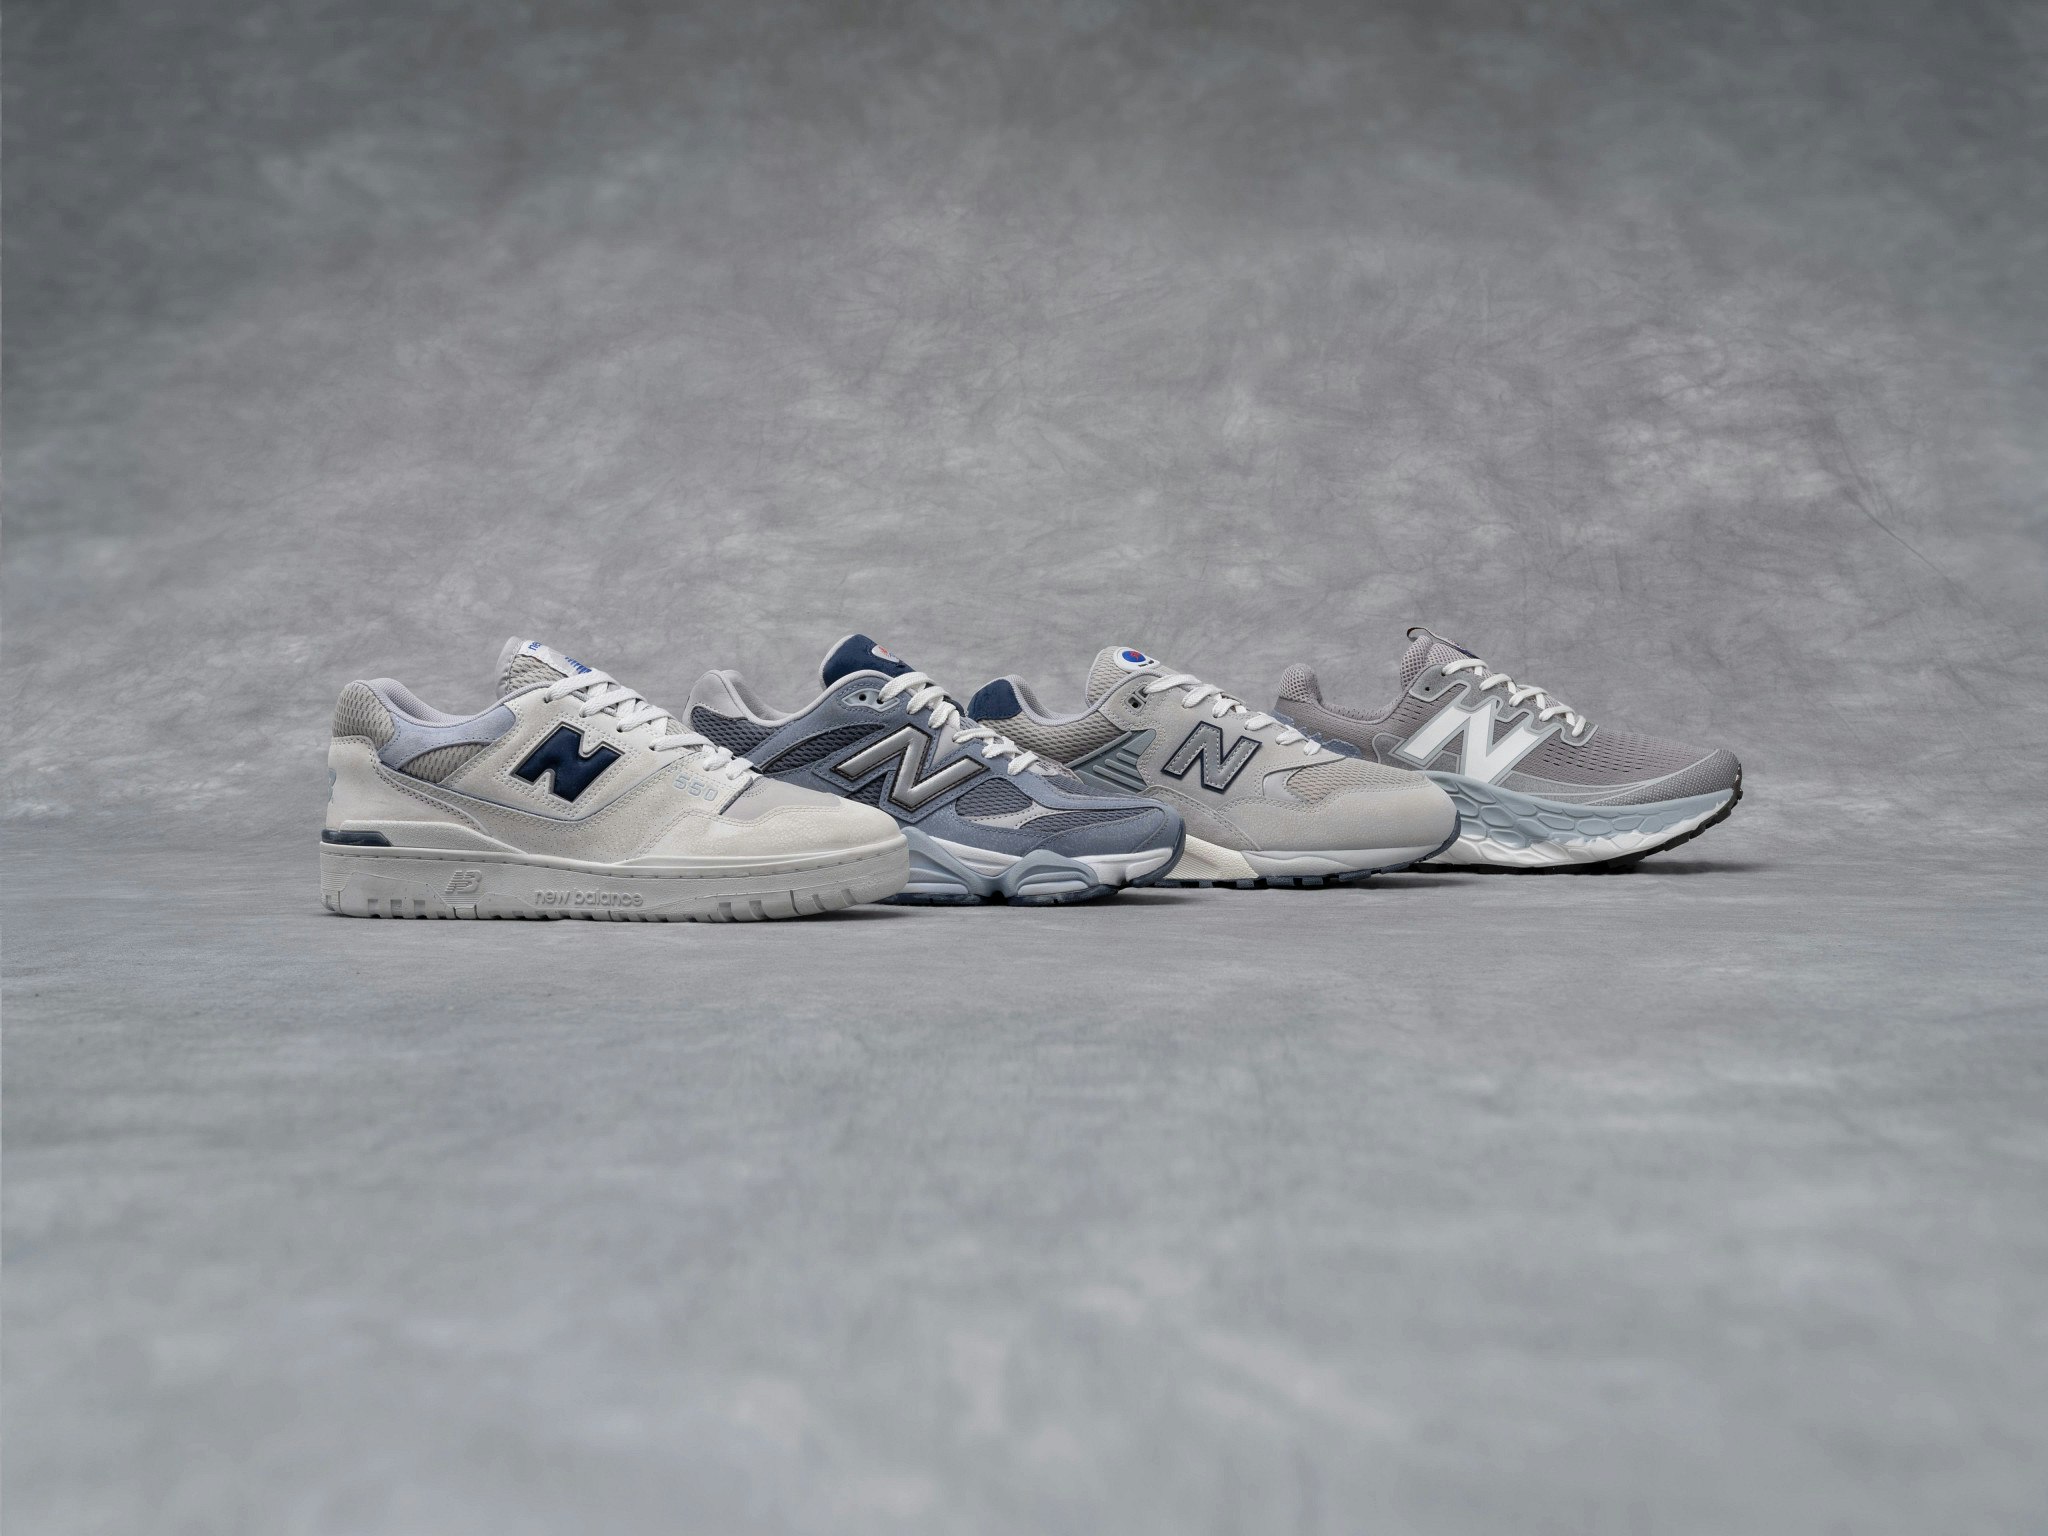 Arruinado rasguño flexible New Balance Is Well And Truly In Its Heyday With Grey Day